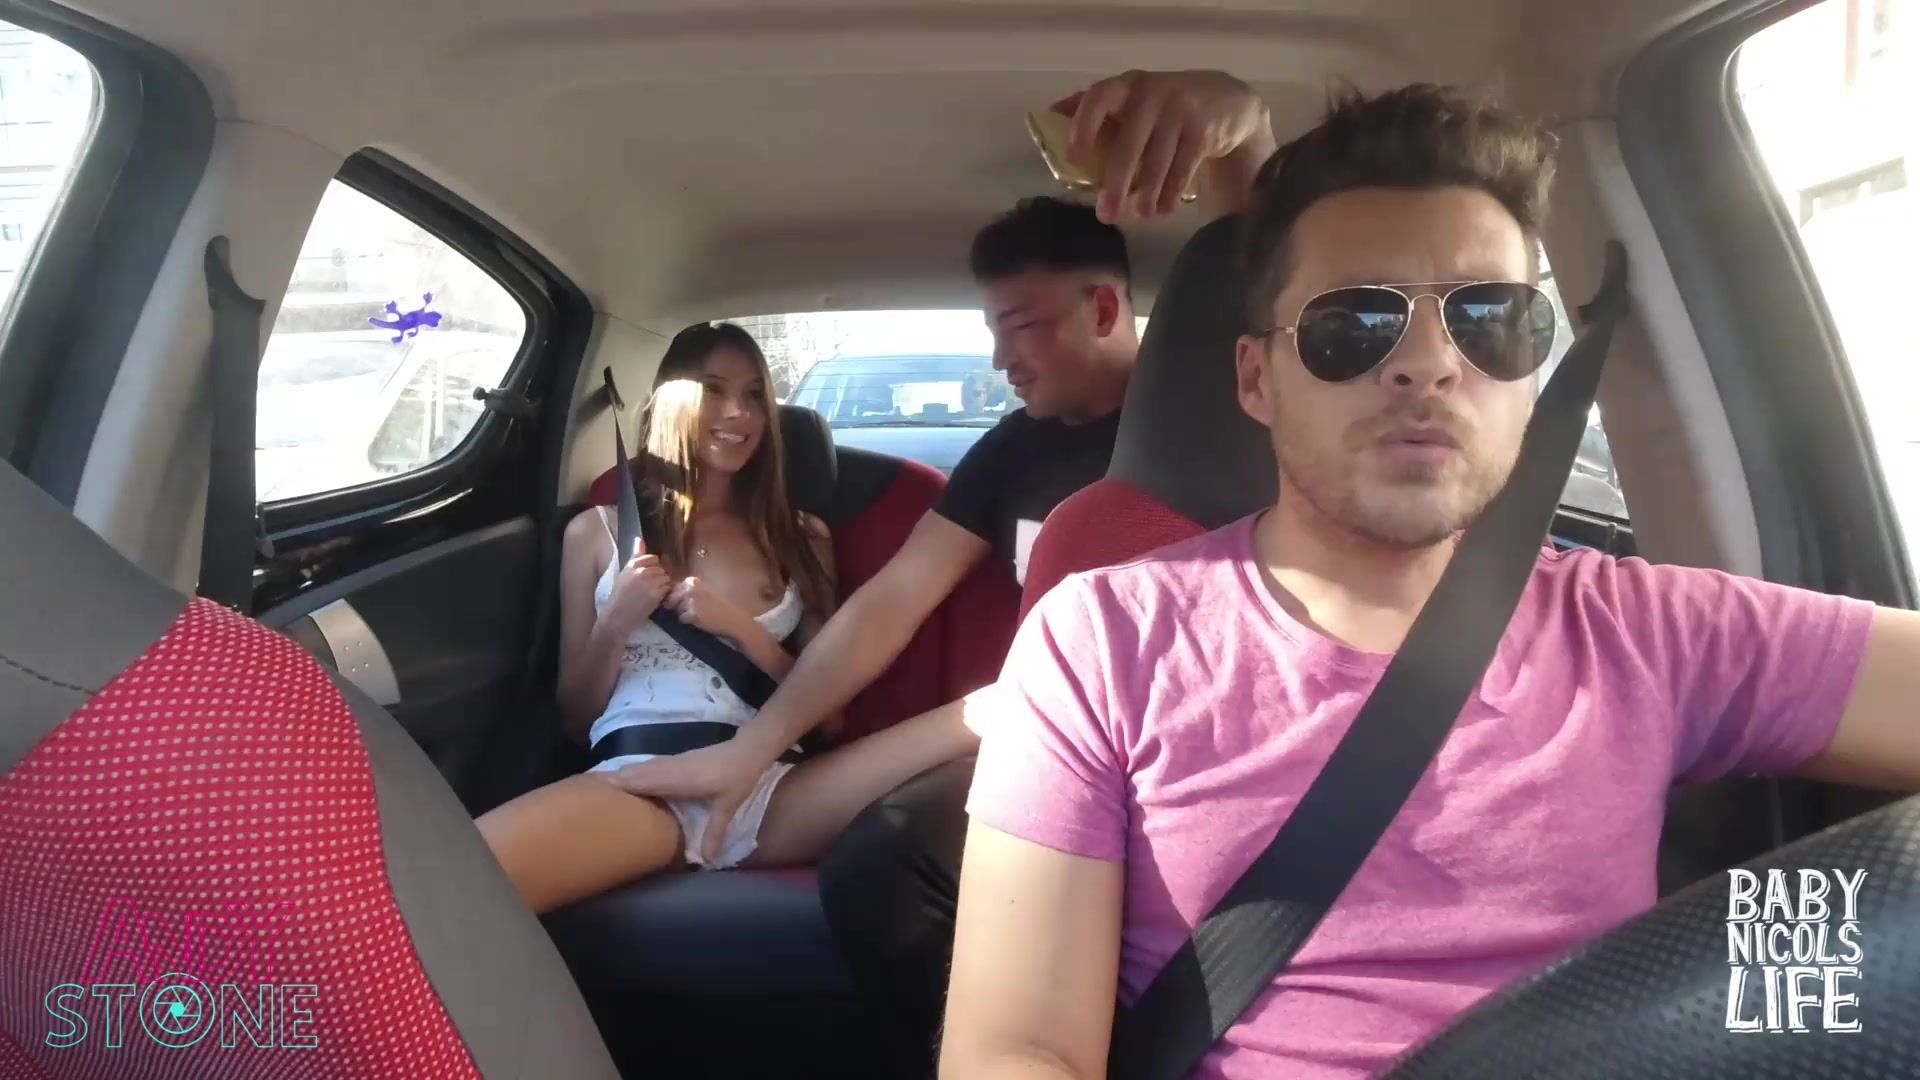 Free HD SEX ON UBER, BLOWJOB IN THE BACK SEAT! PUBLIC FUCKING! Porn Video image